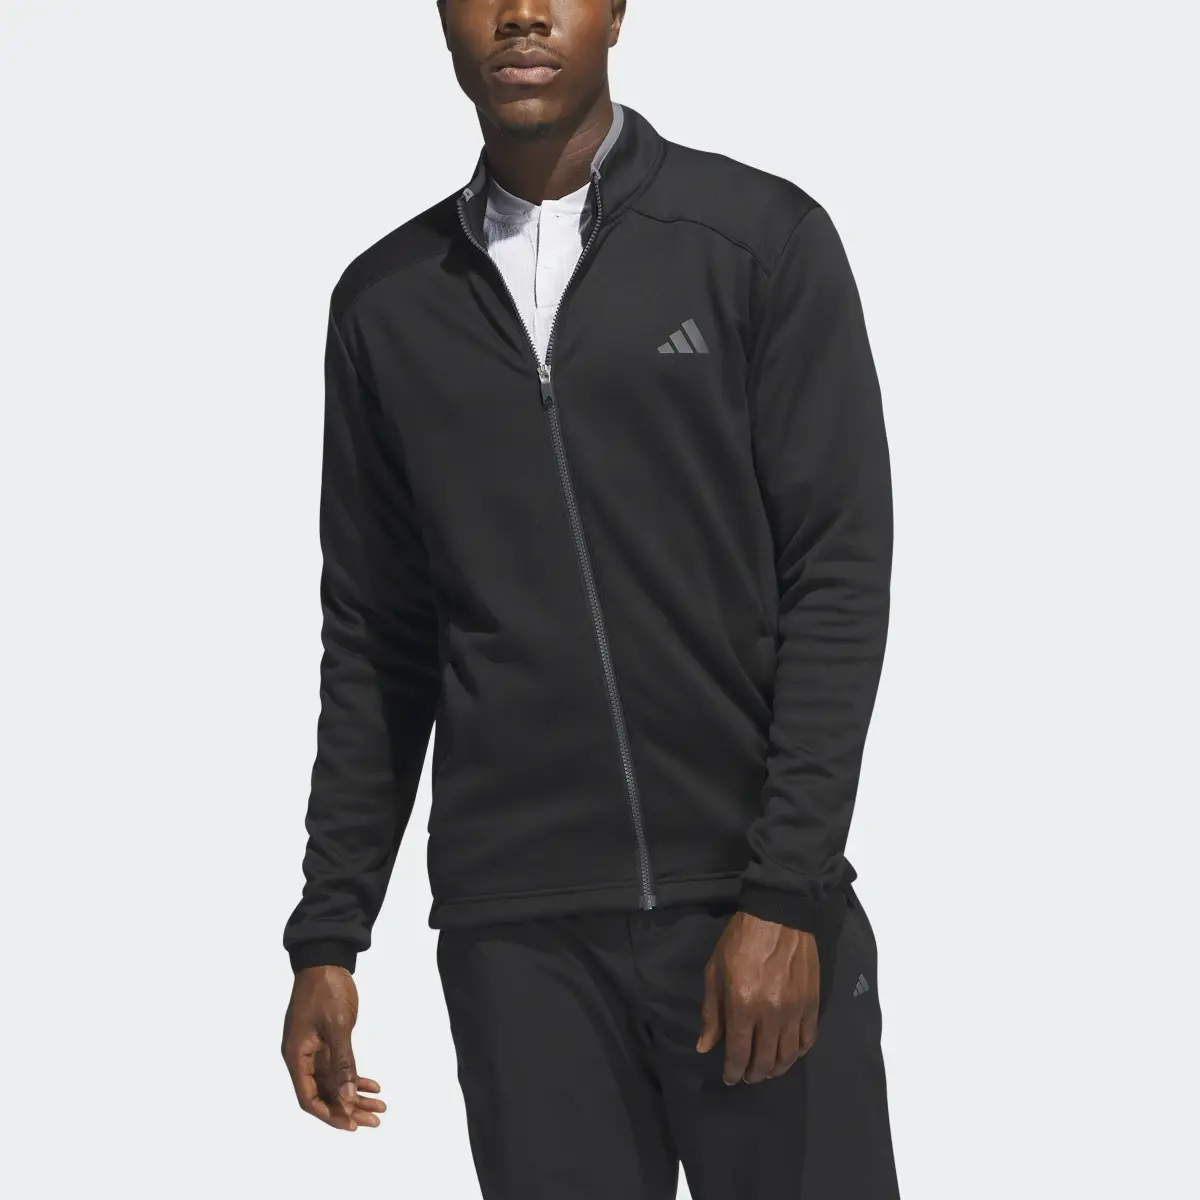 Adidas COLD.RDY Full-Zip Jacket. 1